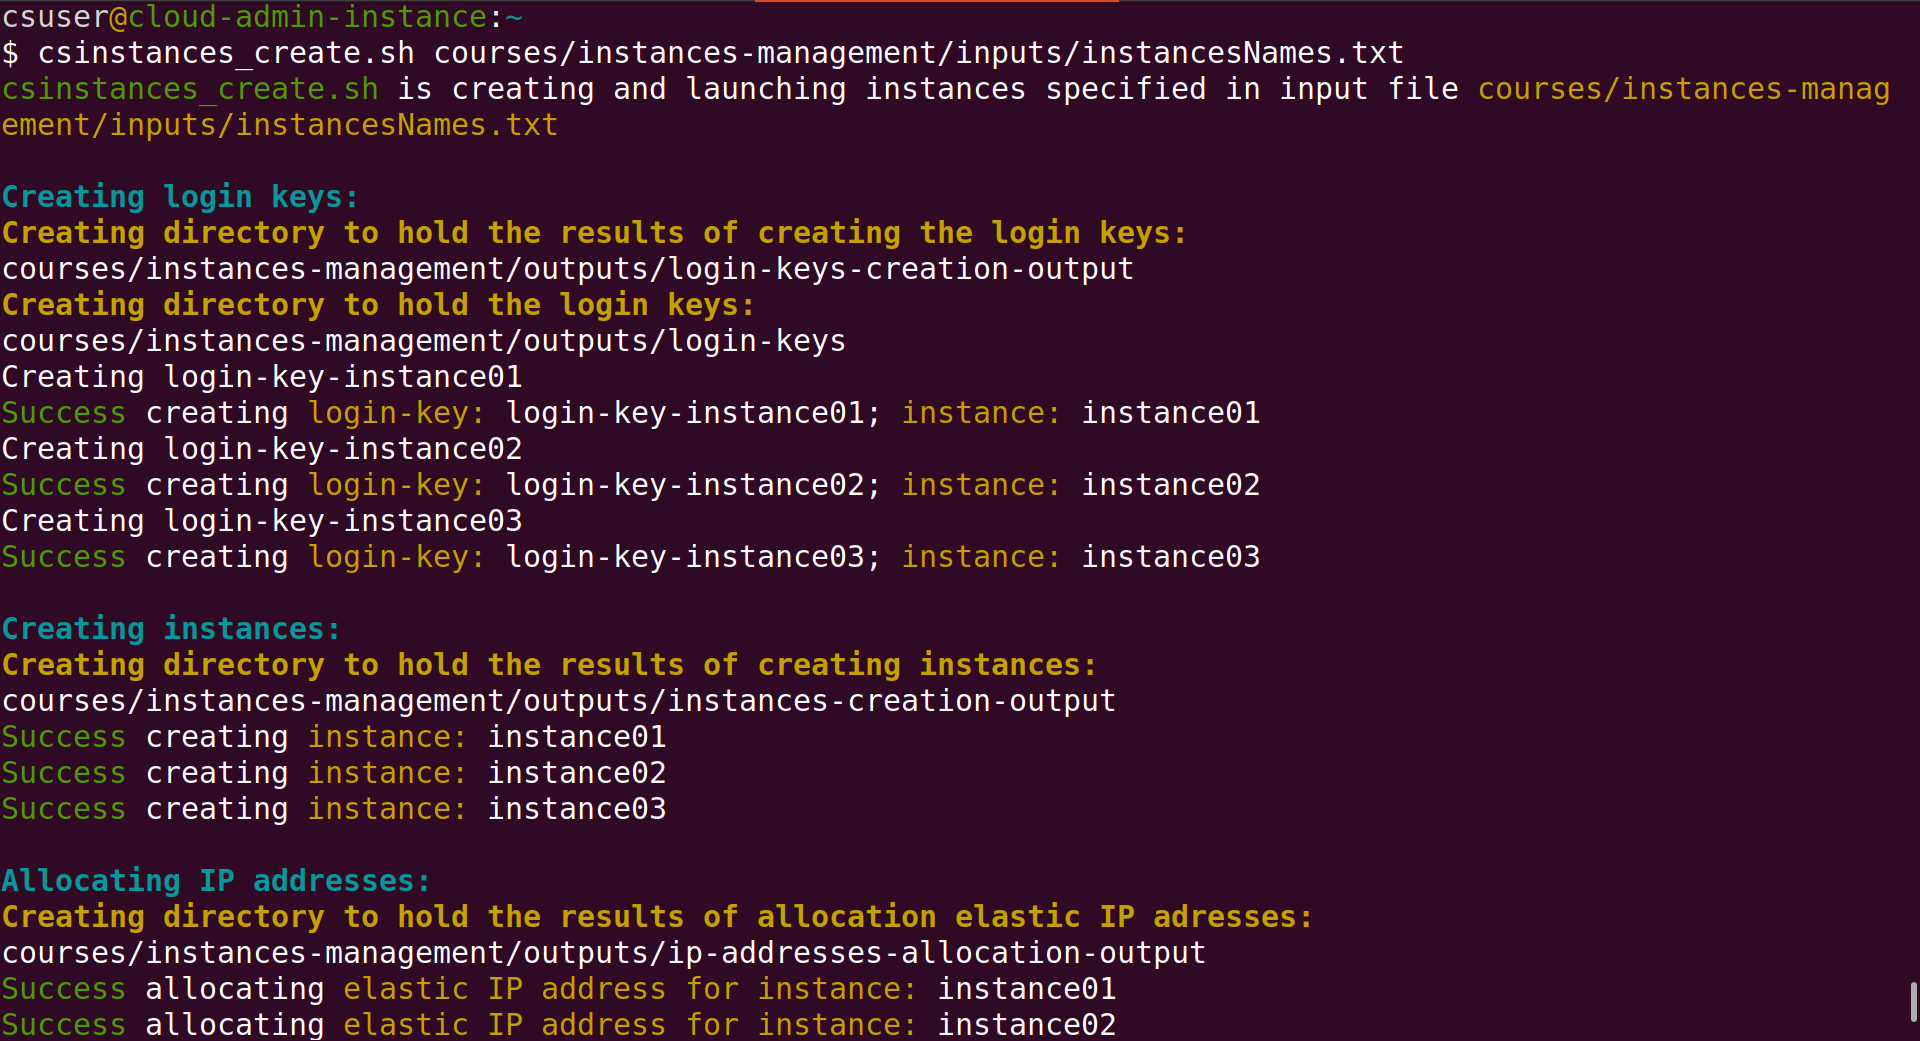 Screenshot of Linux terminal showing the terminal prompt, the run of the command "csinstances_create.sh courses/instances-management/inputs/instancesNames.txt", and part of the output results of that command.